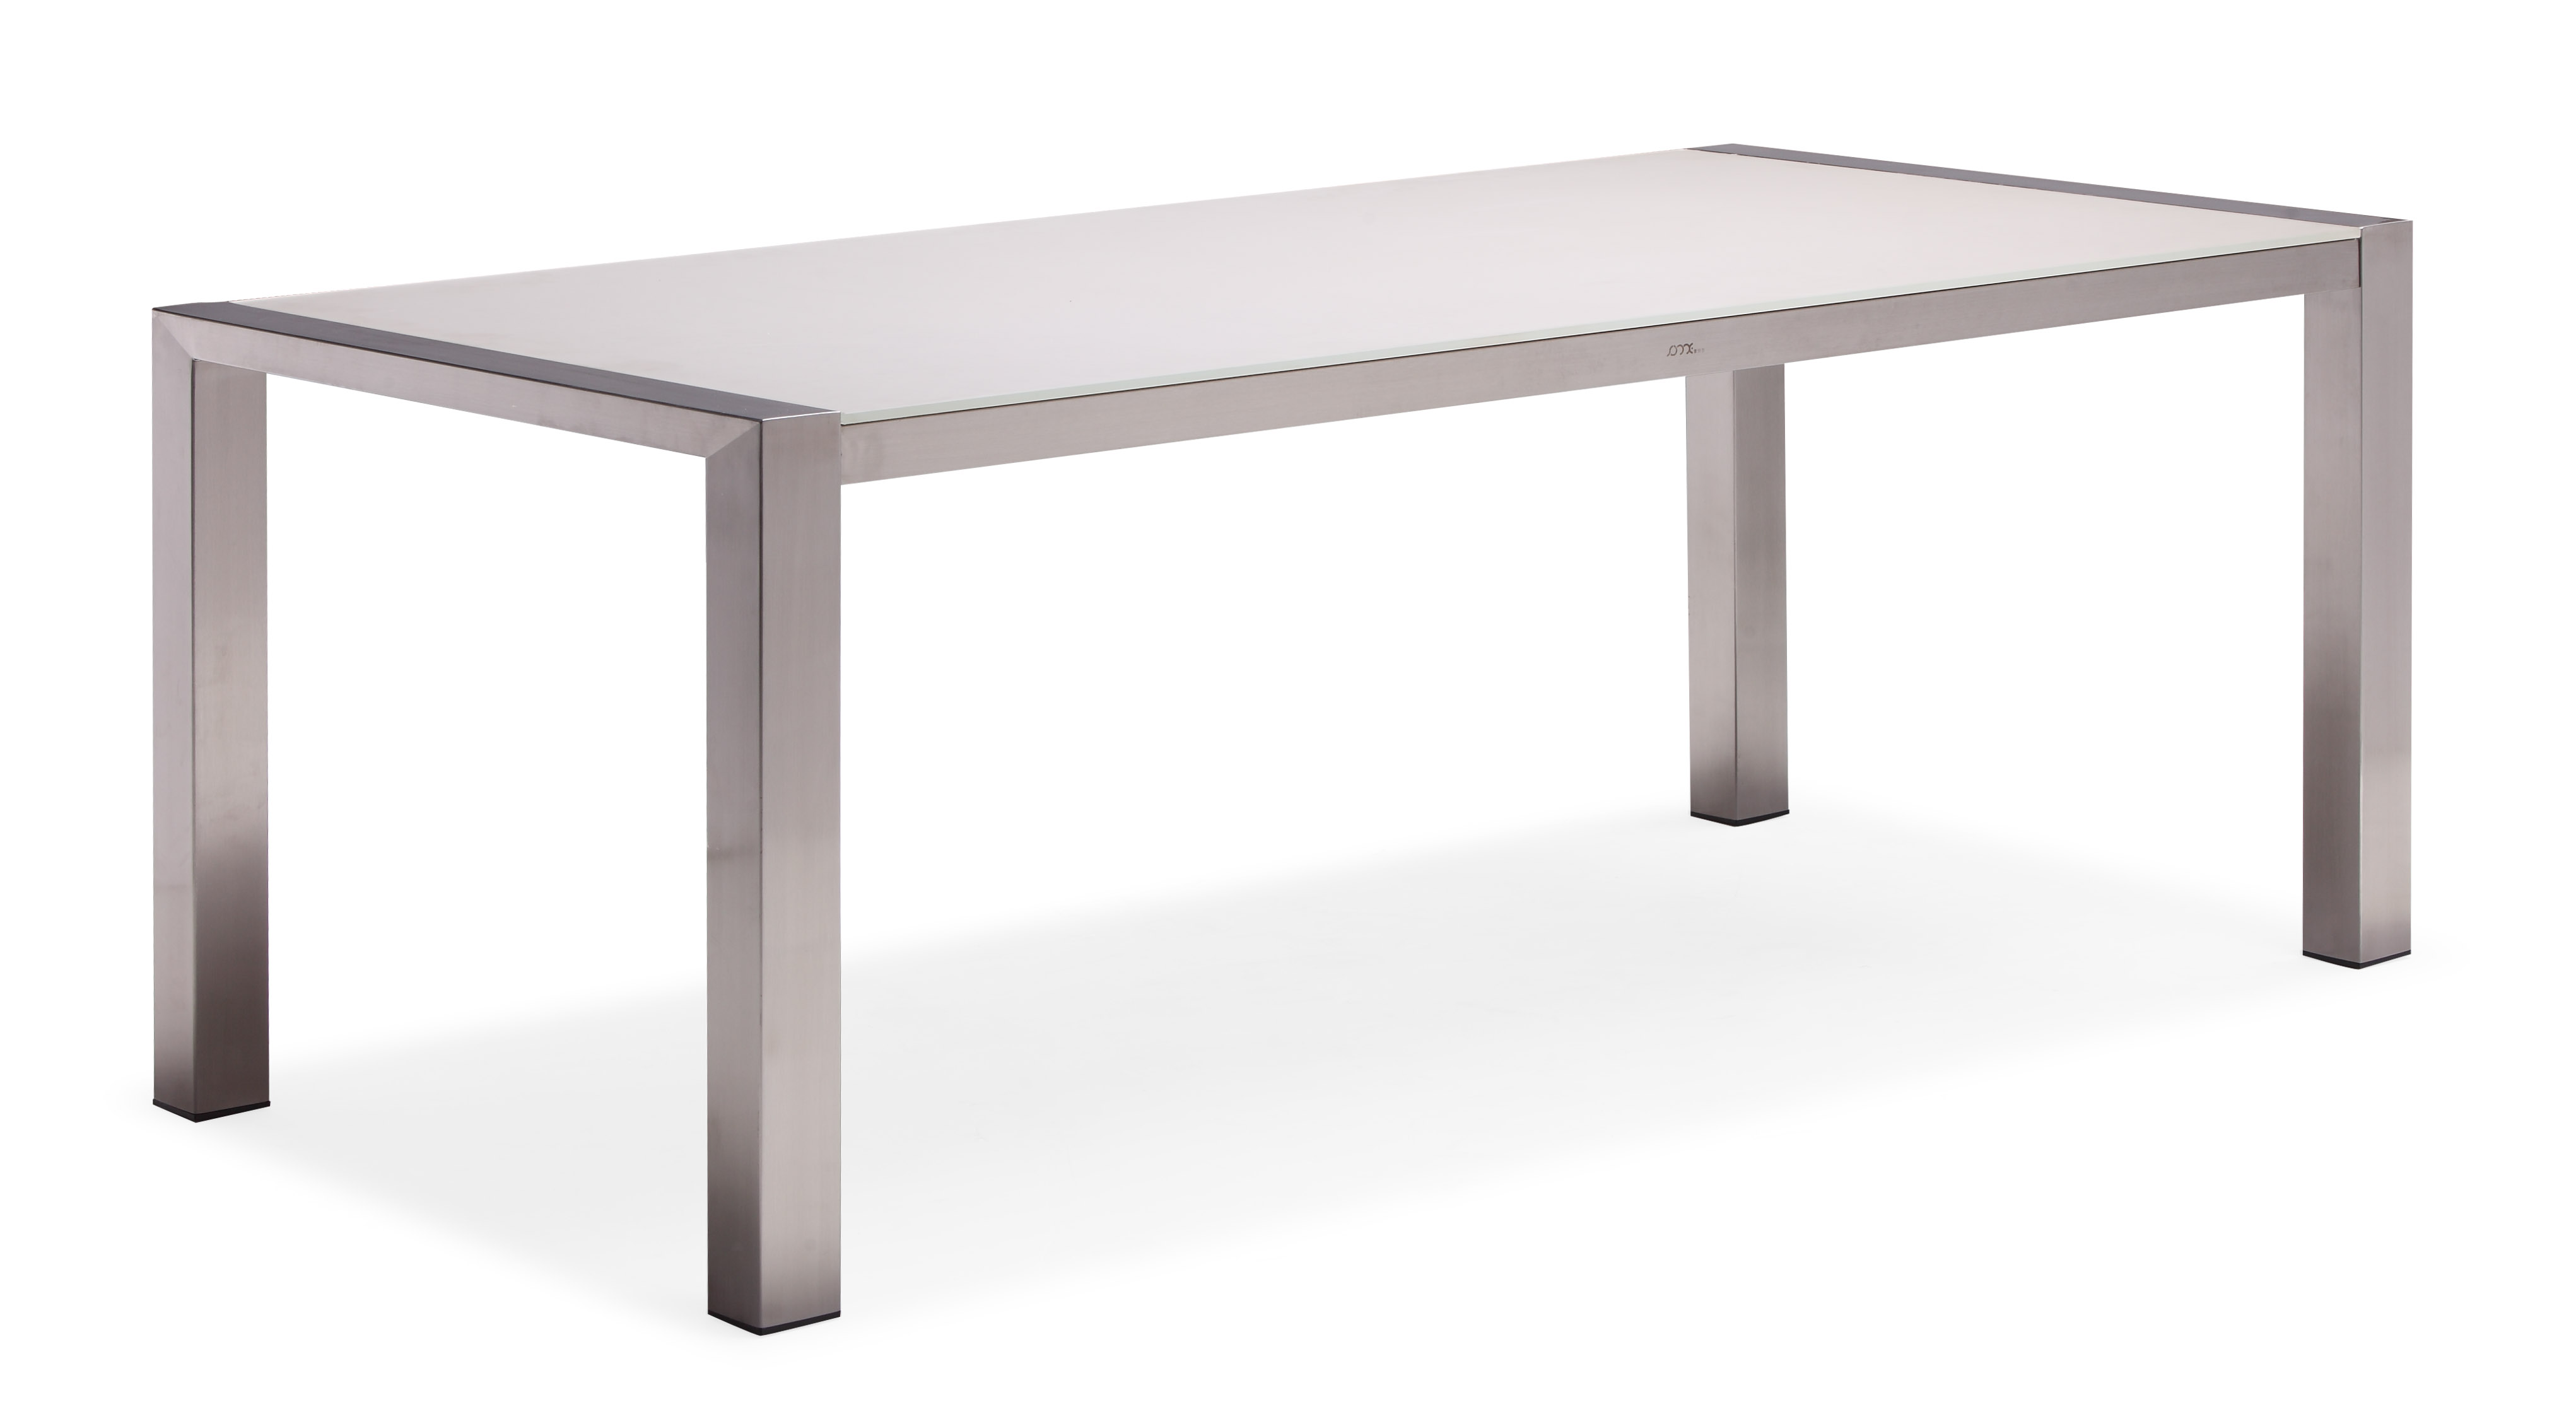 Metal outdoor dining furniture patio dining table (T009G)